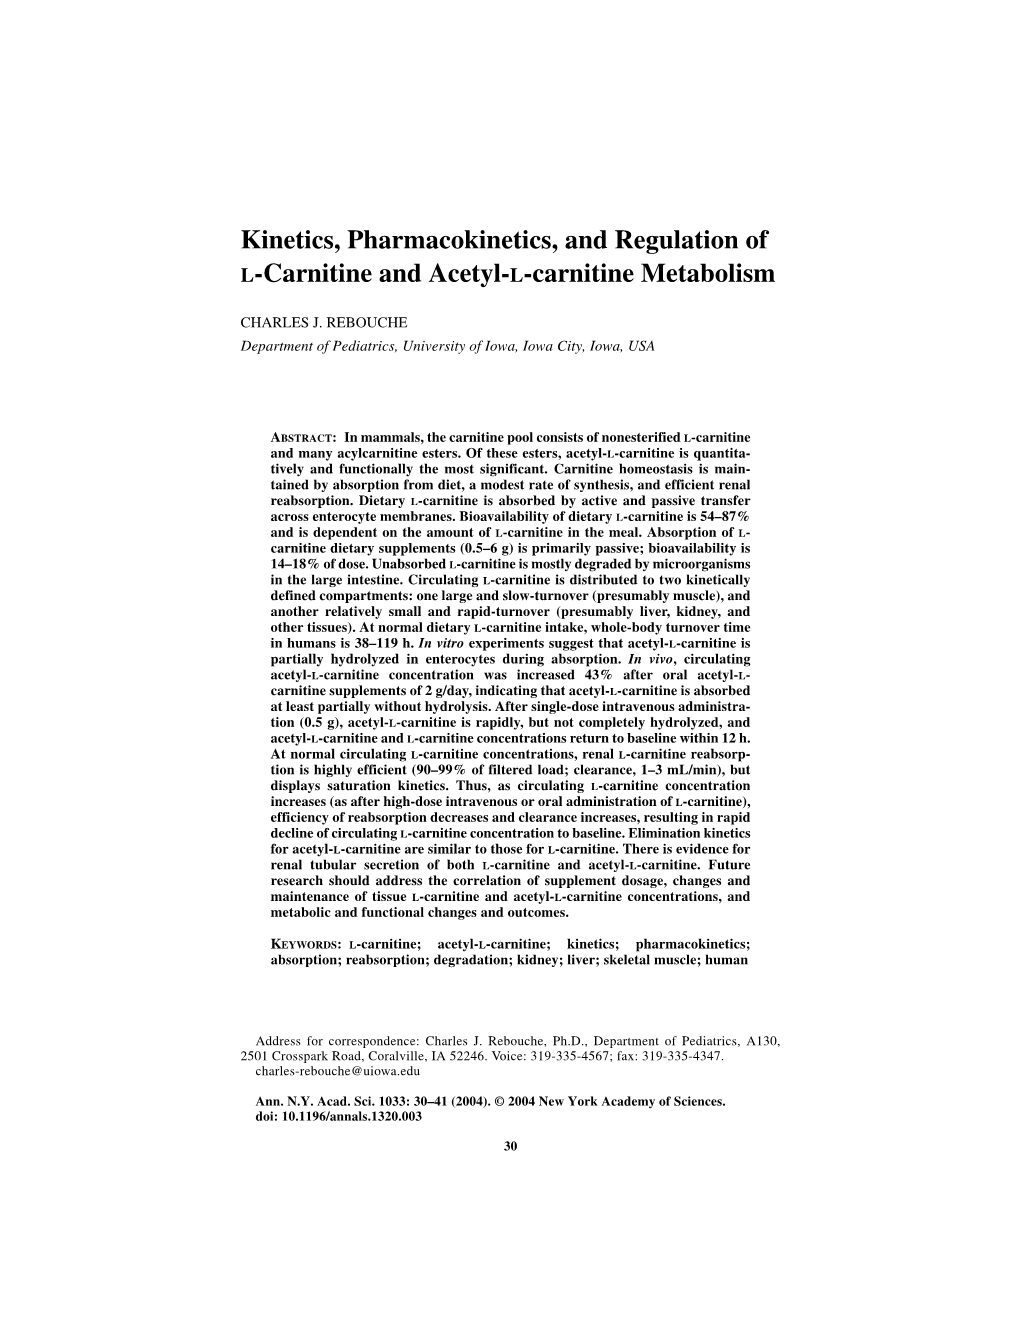 Kinetics, Pharmacokinetics, and Regulation of L-Carnitine and Acetyl-L-Carnitine Metabolism